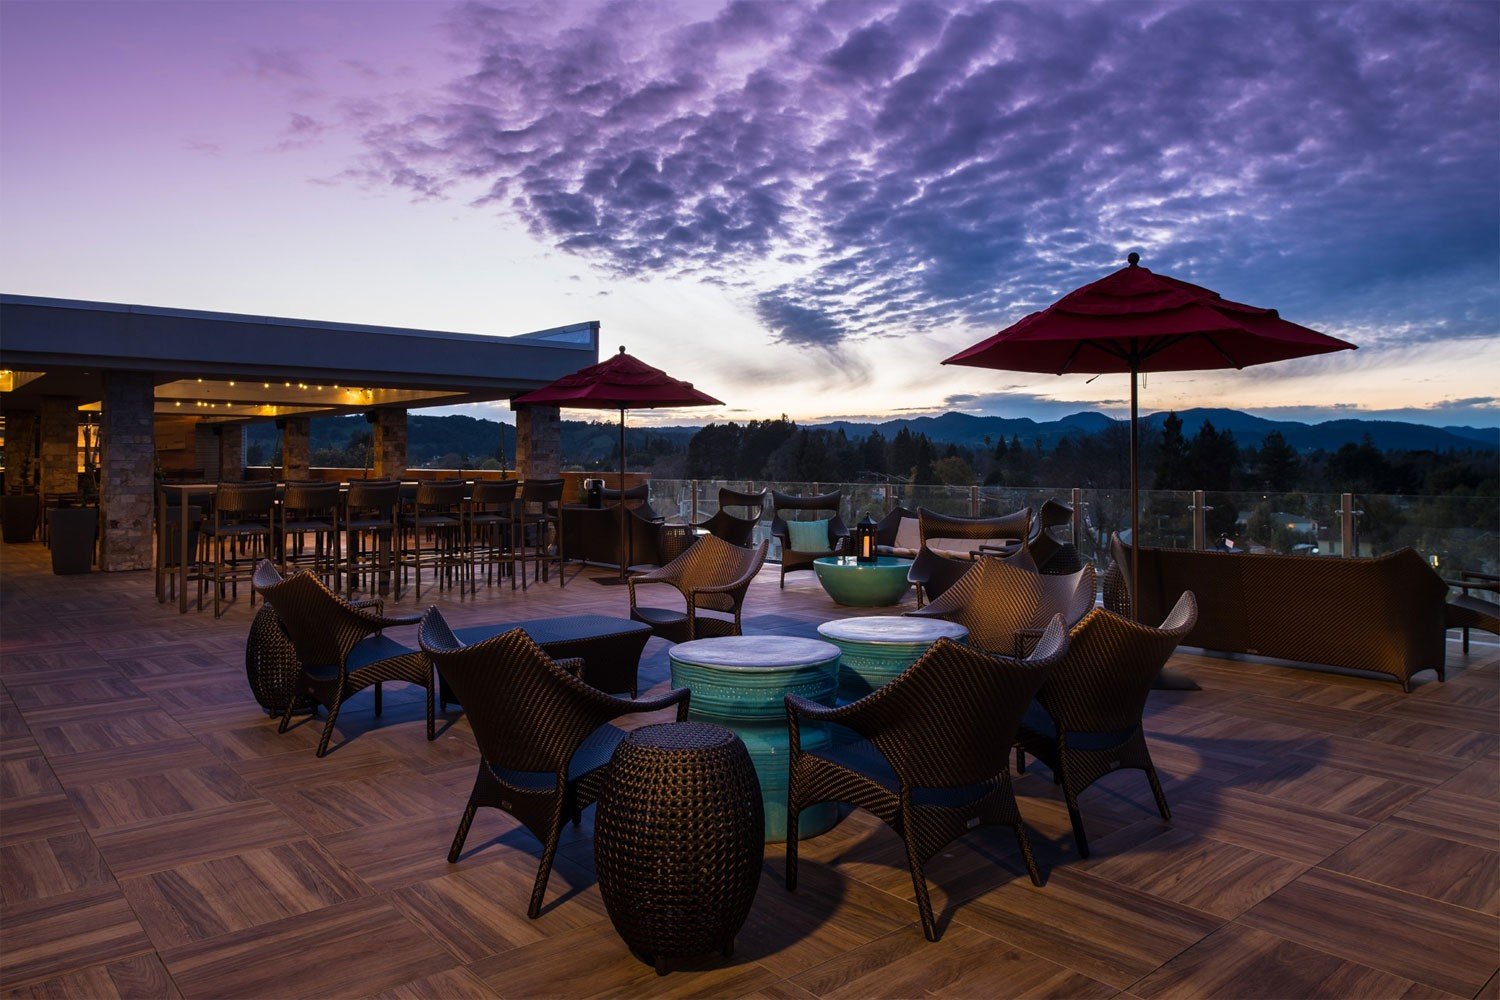 Archer Hotel Napa - Rooftop seating in the evening sky